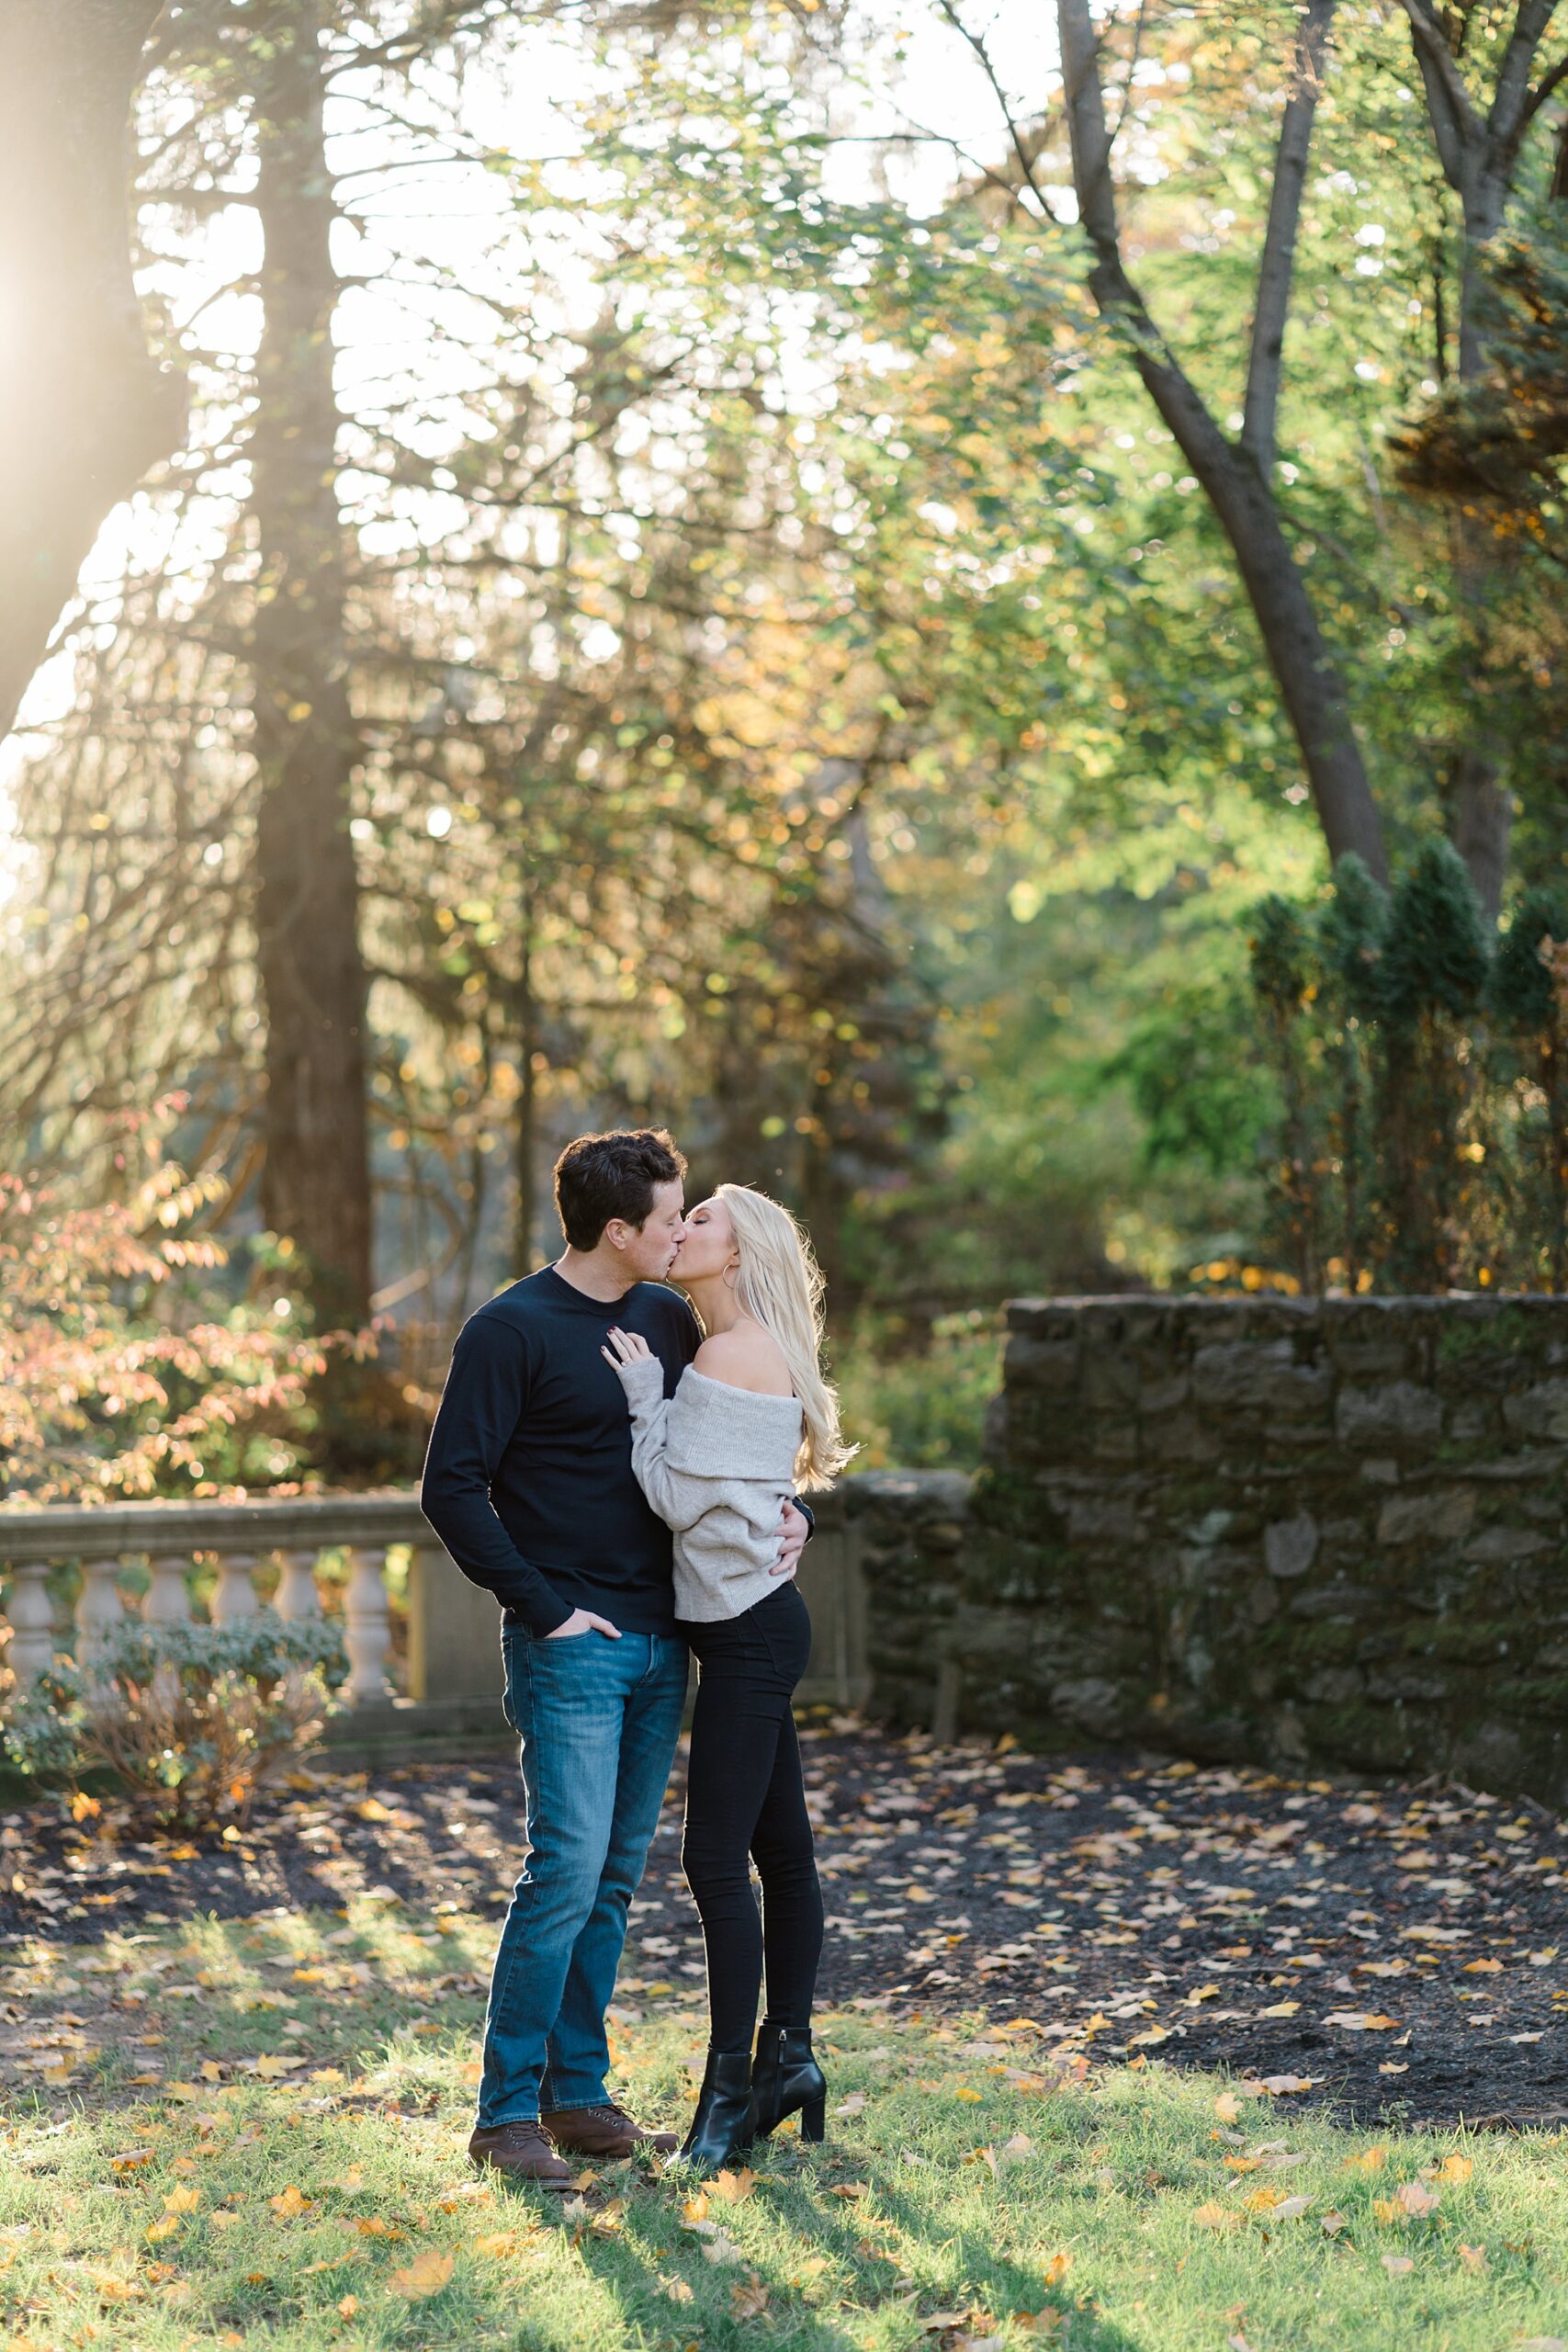 When to Schedule an Engagement Session